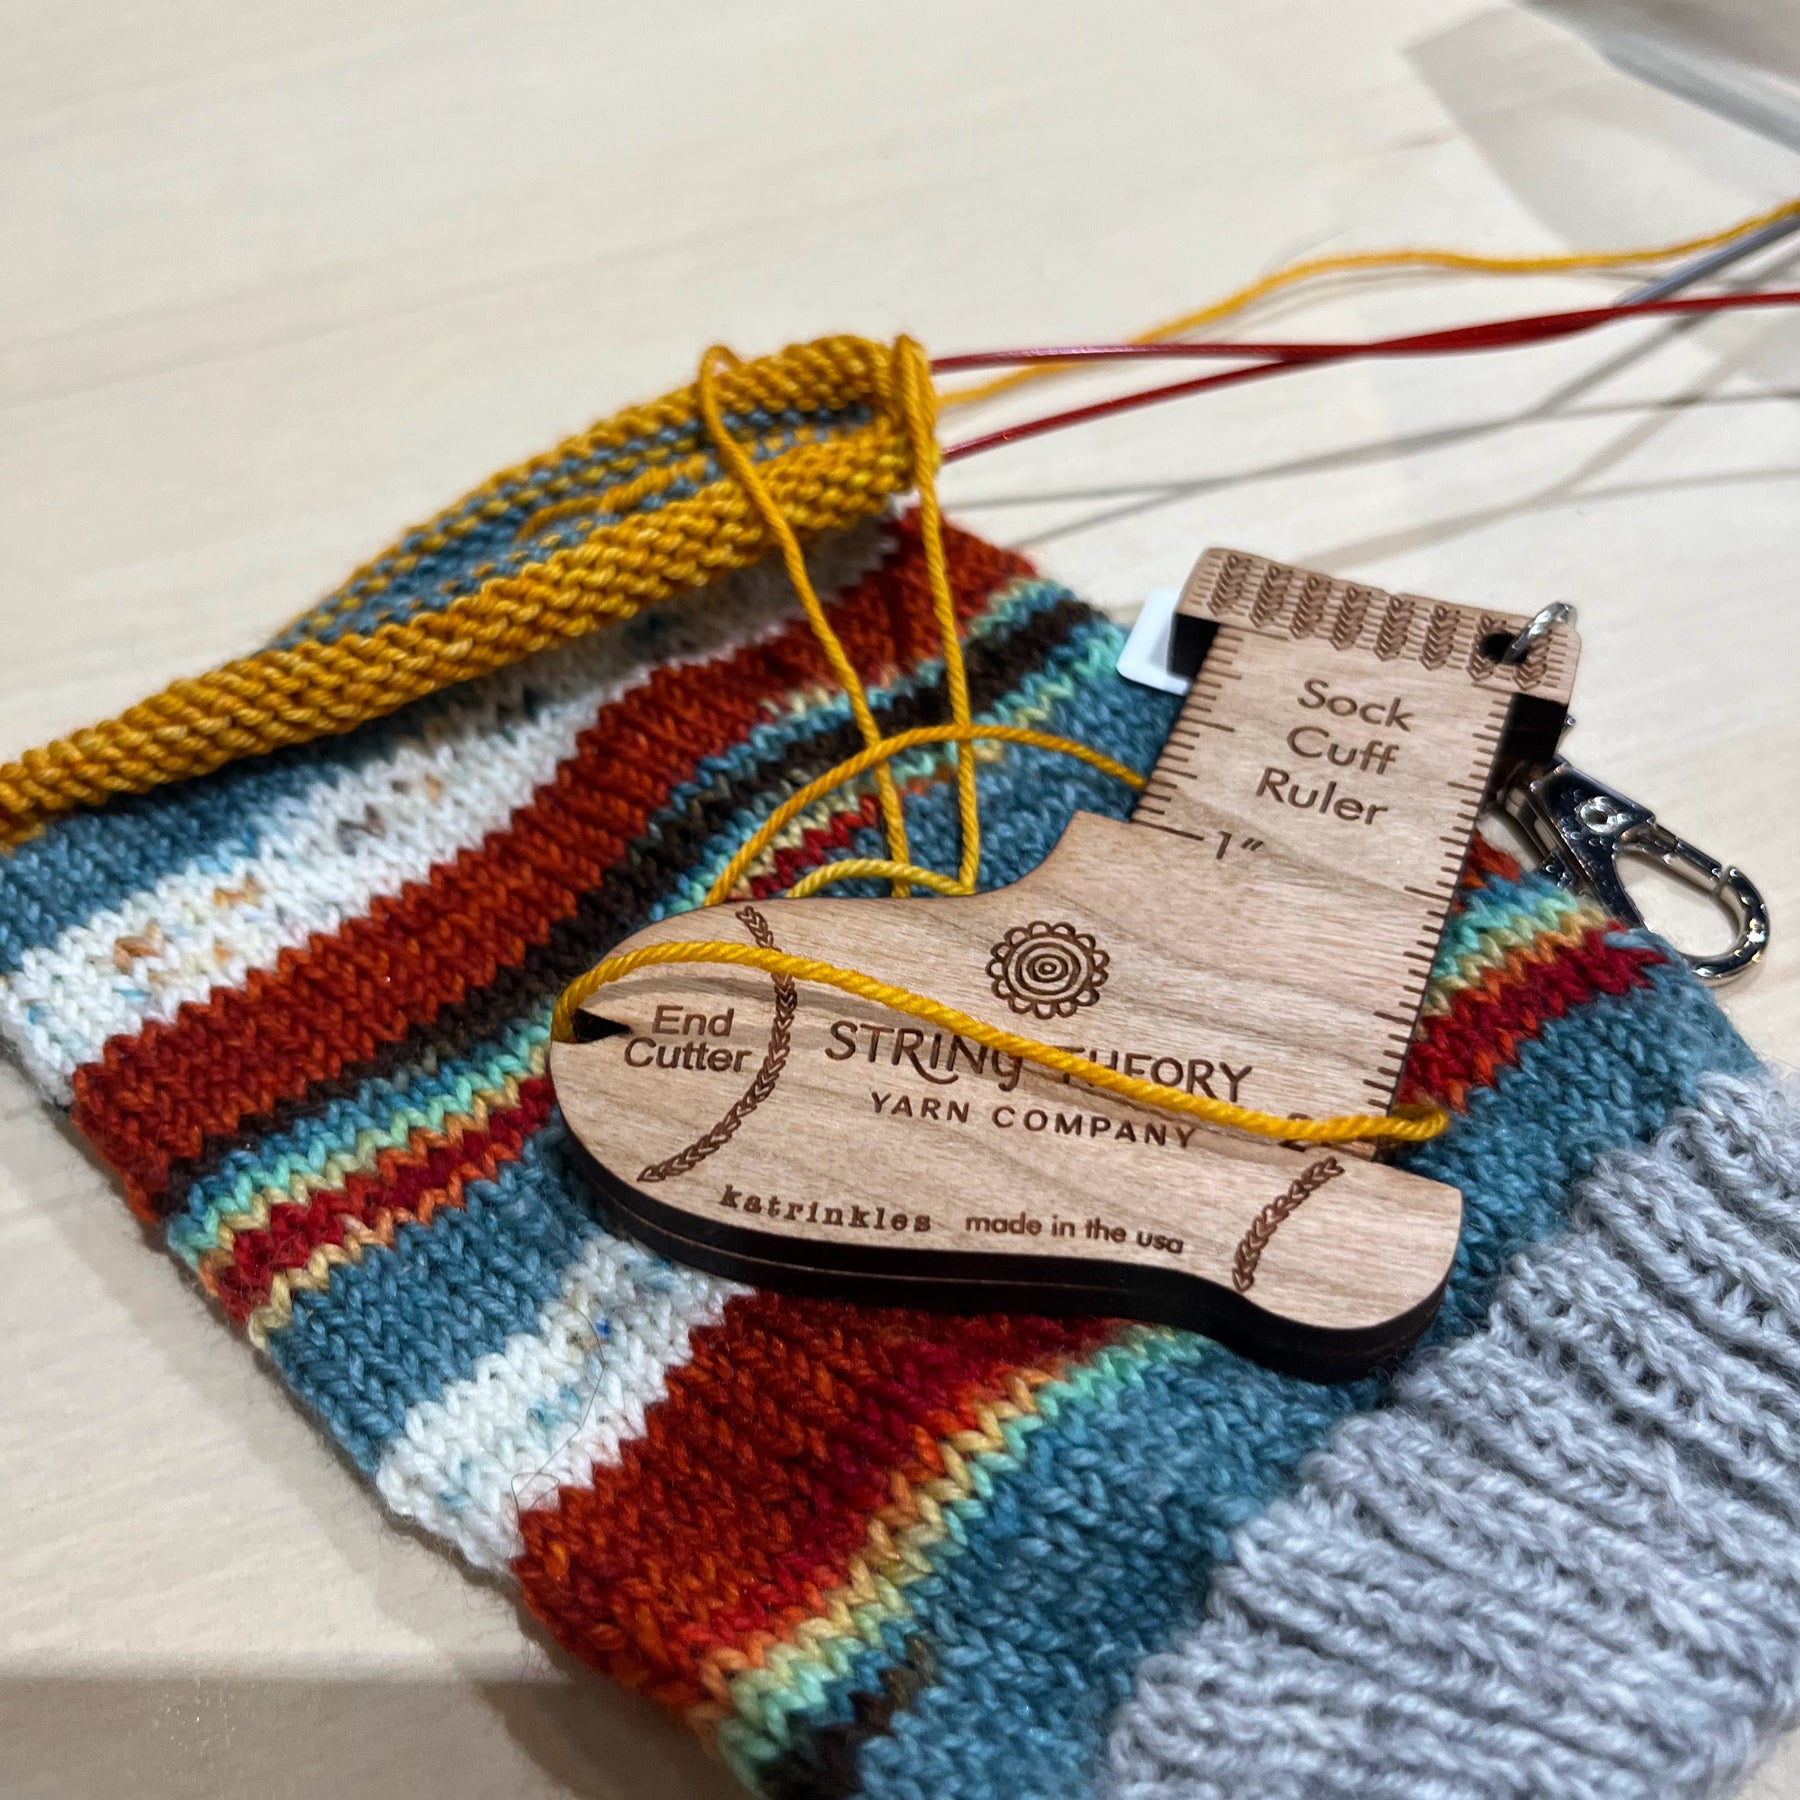 Our favorite sock knitting notions